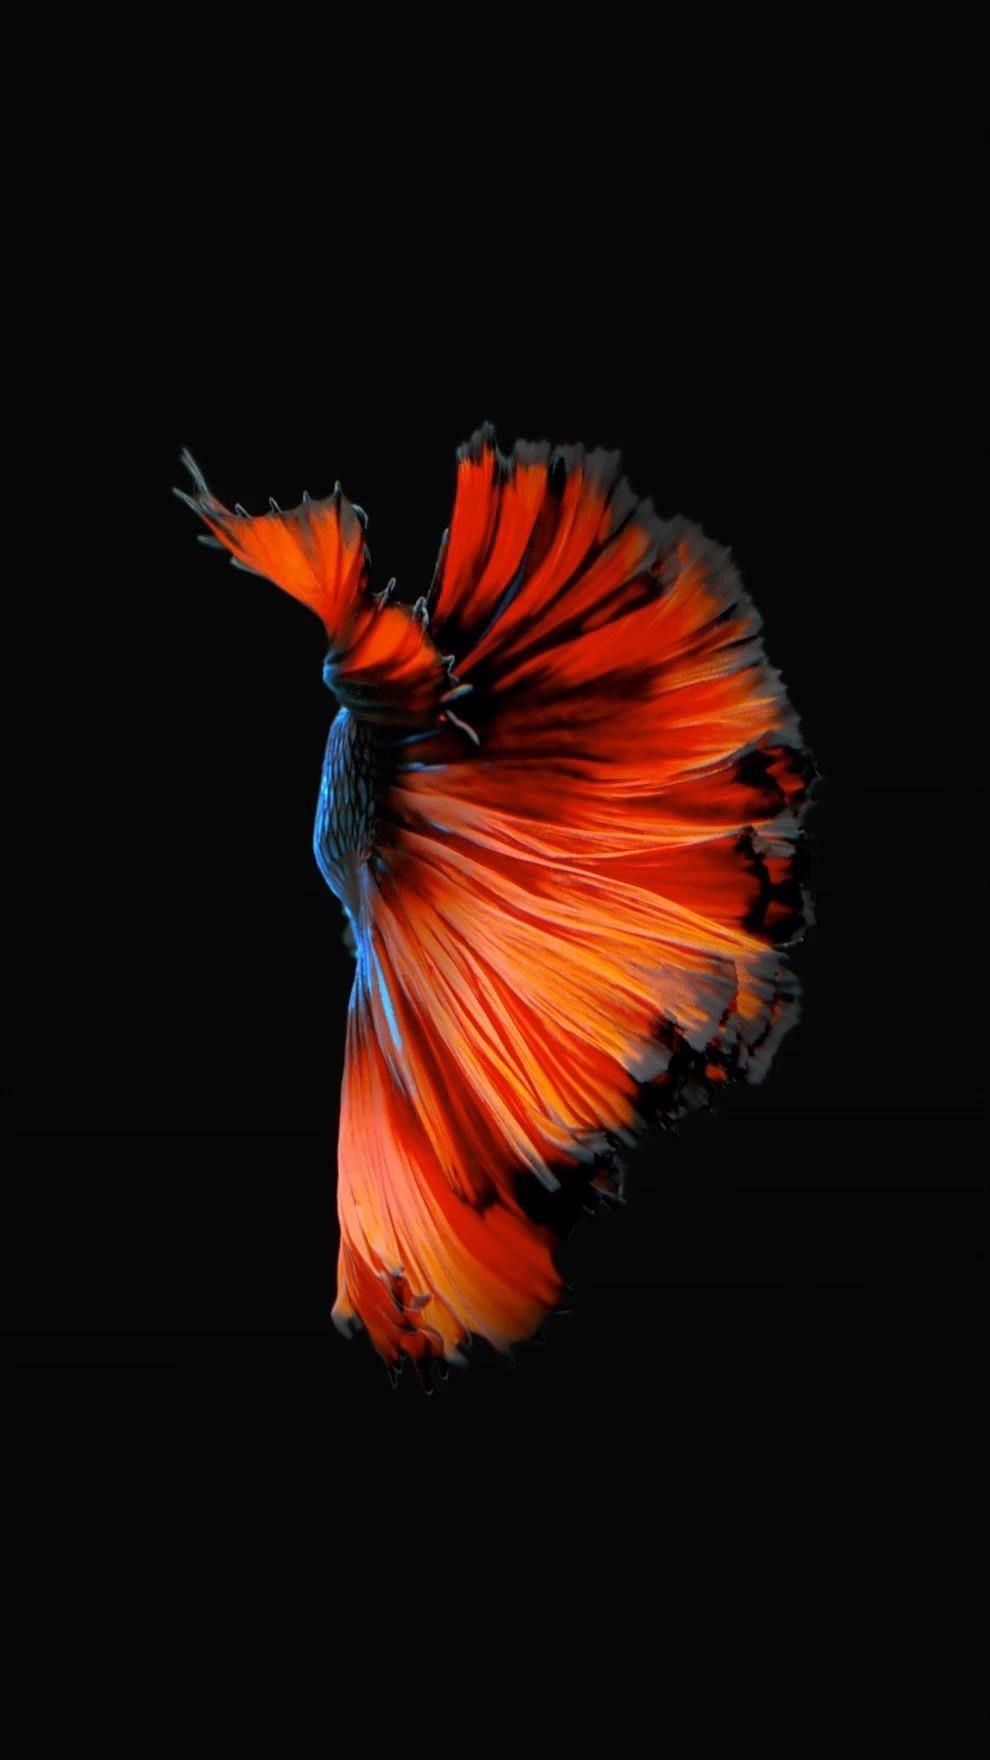 How to Get Apple's Live Fish Wallpaper Back on Your iPhone in iOS